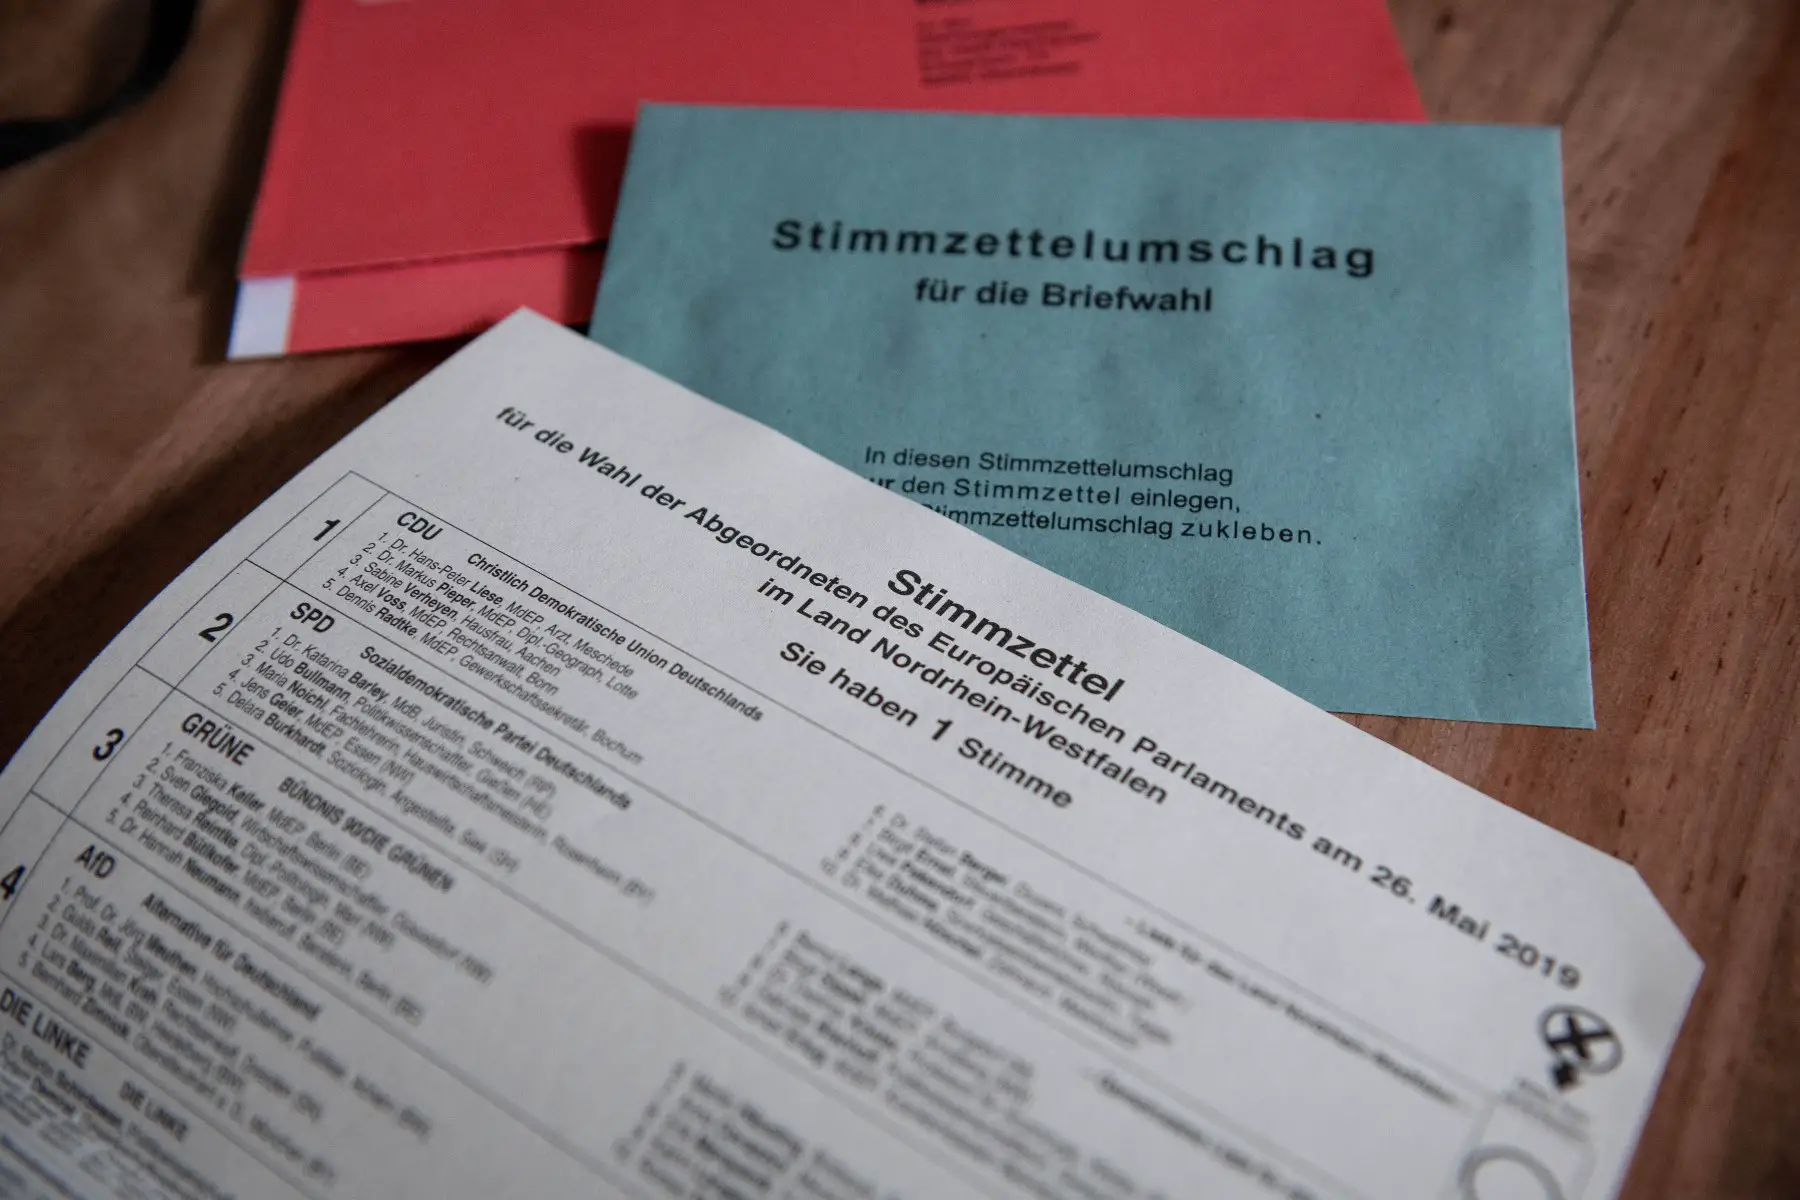 Part of the ballot paper for the European Parliamentary elections for NRW in Germany